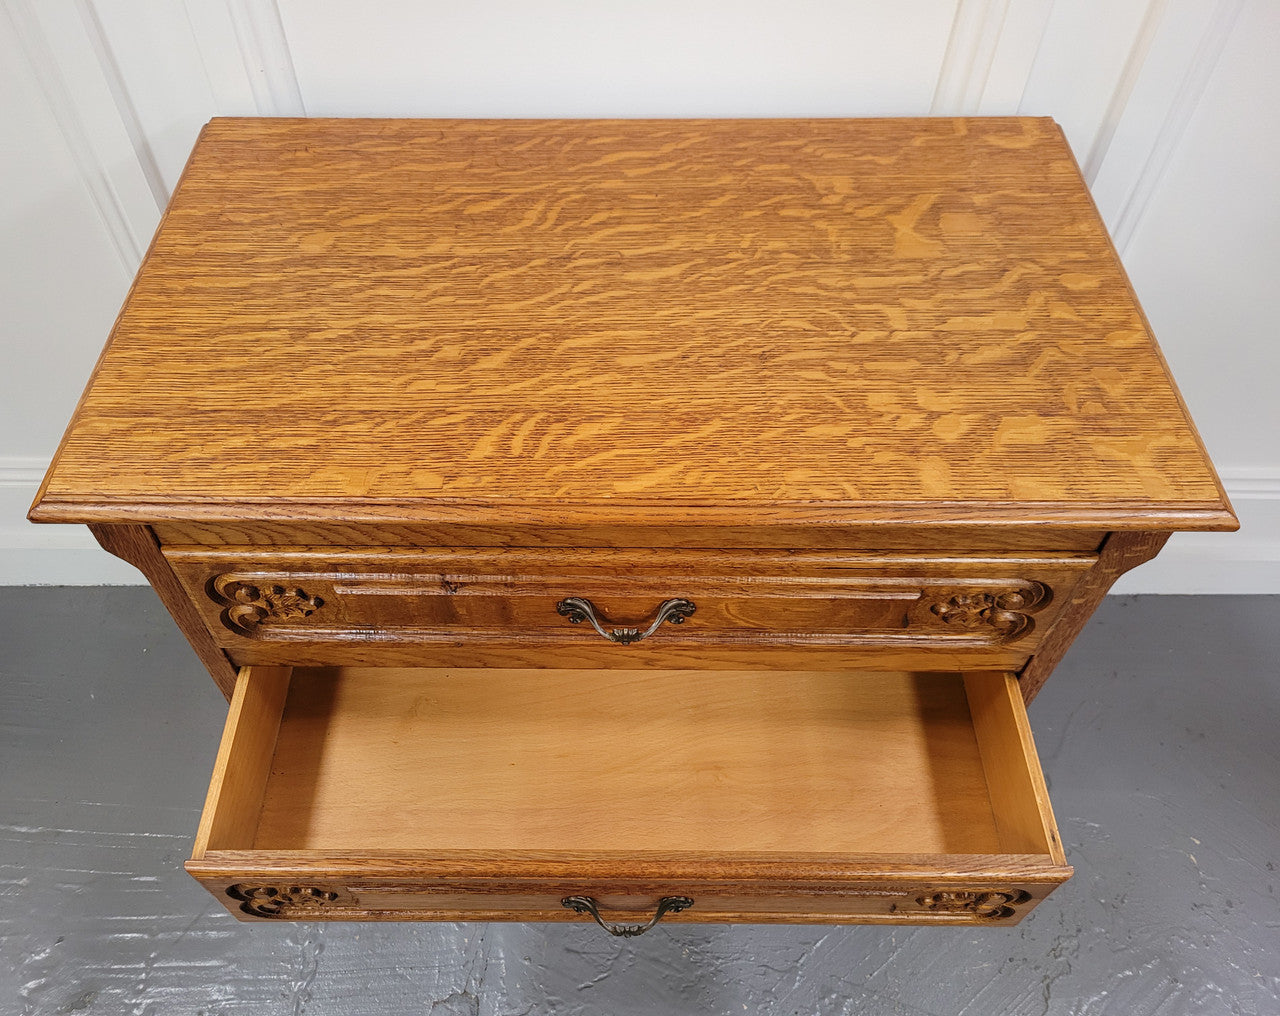 Vintage French light Oak Louis XV style chest of three drawers. It has beautiful cabriole legs, elegant brass handles and carvings. It is in good original detailed condition and has been sourced from France.